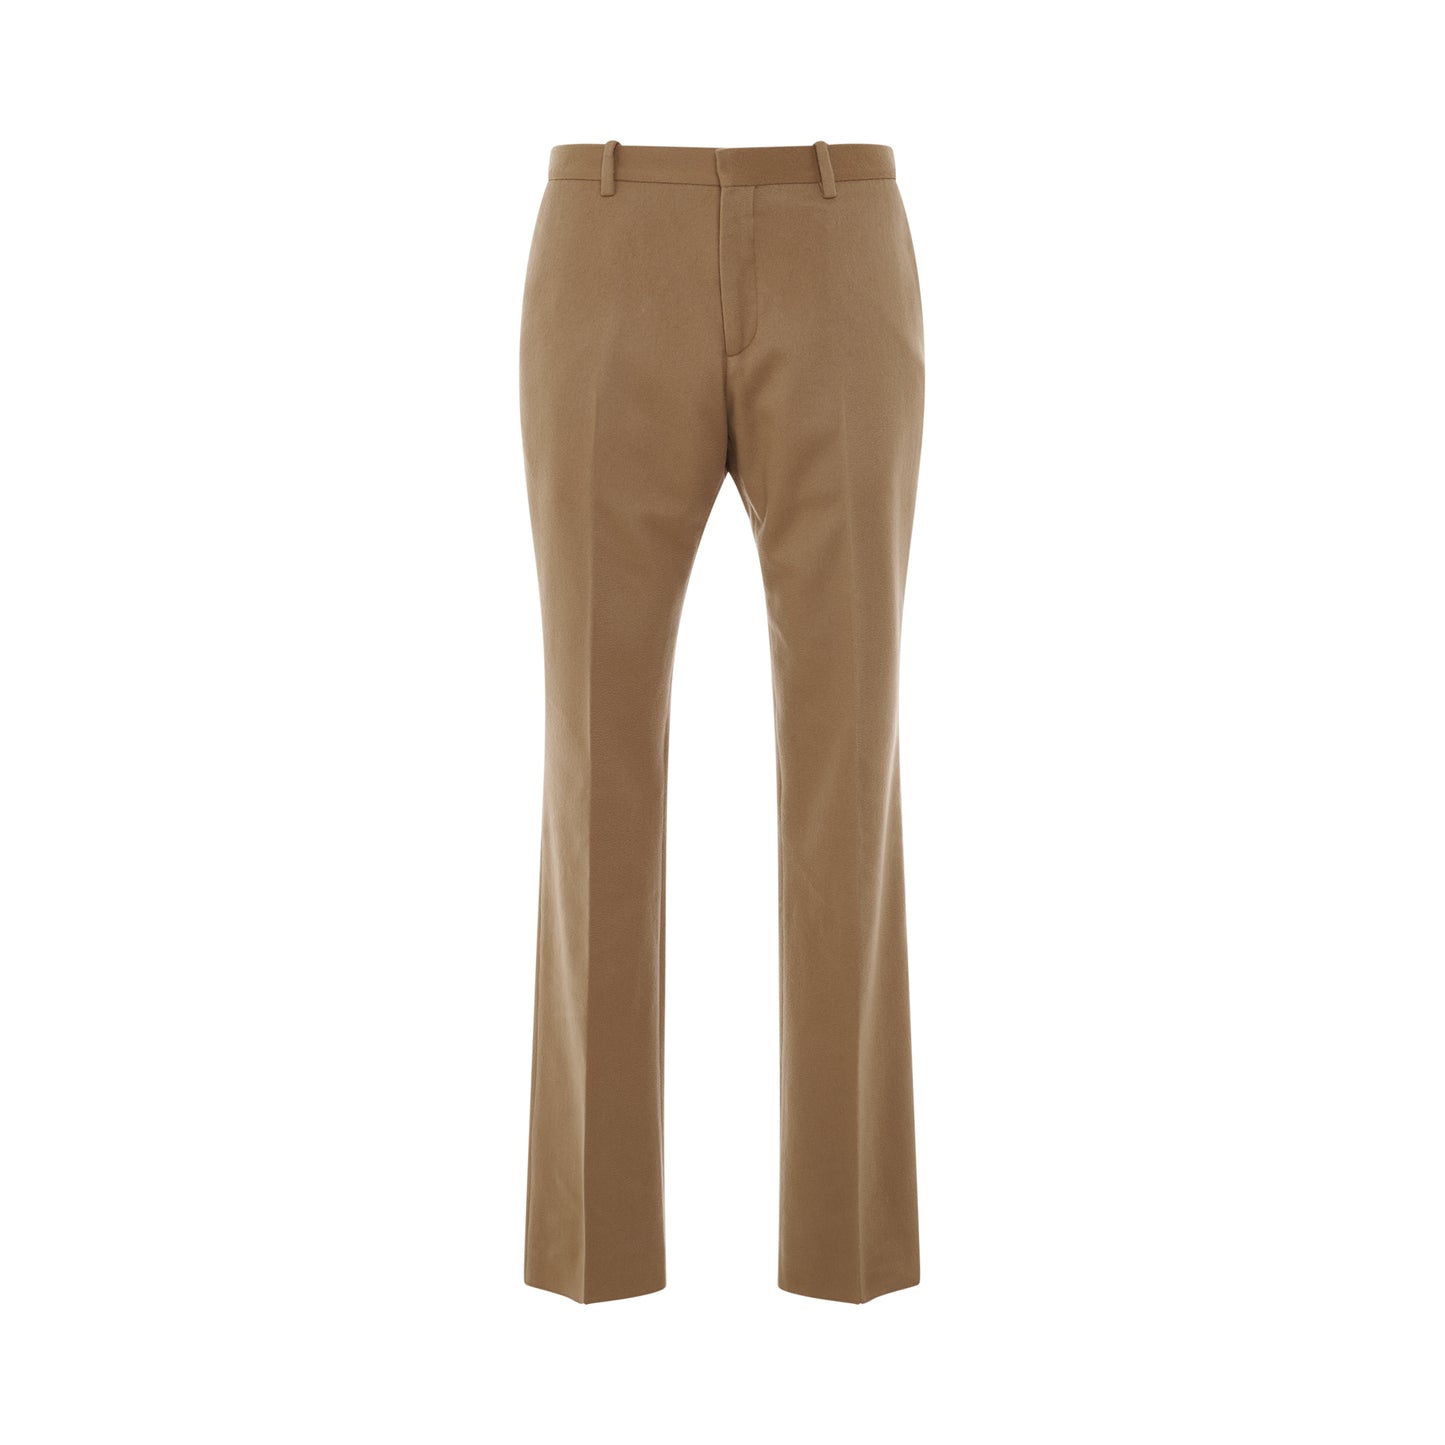 Tags Cashmere Slim Pant in Camel